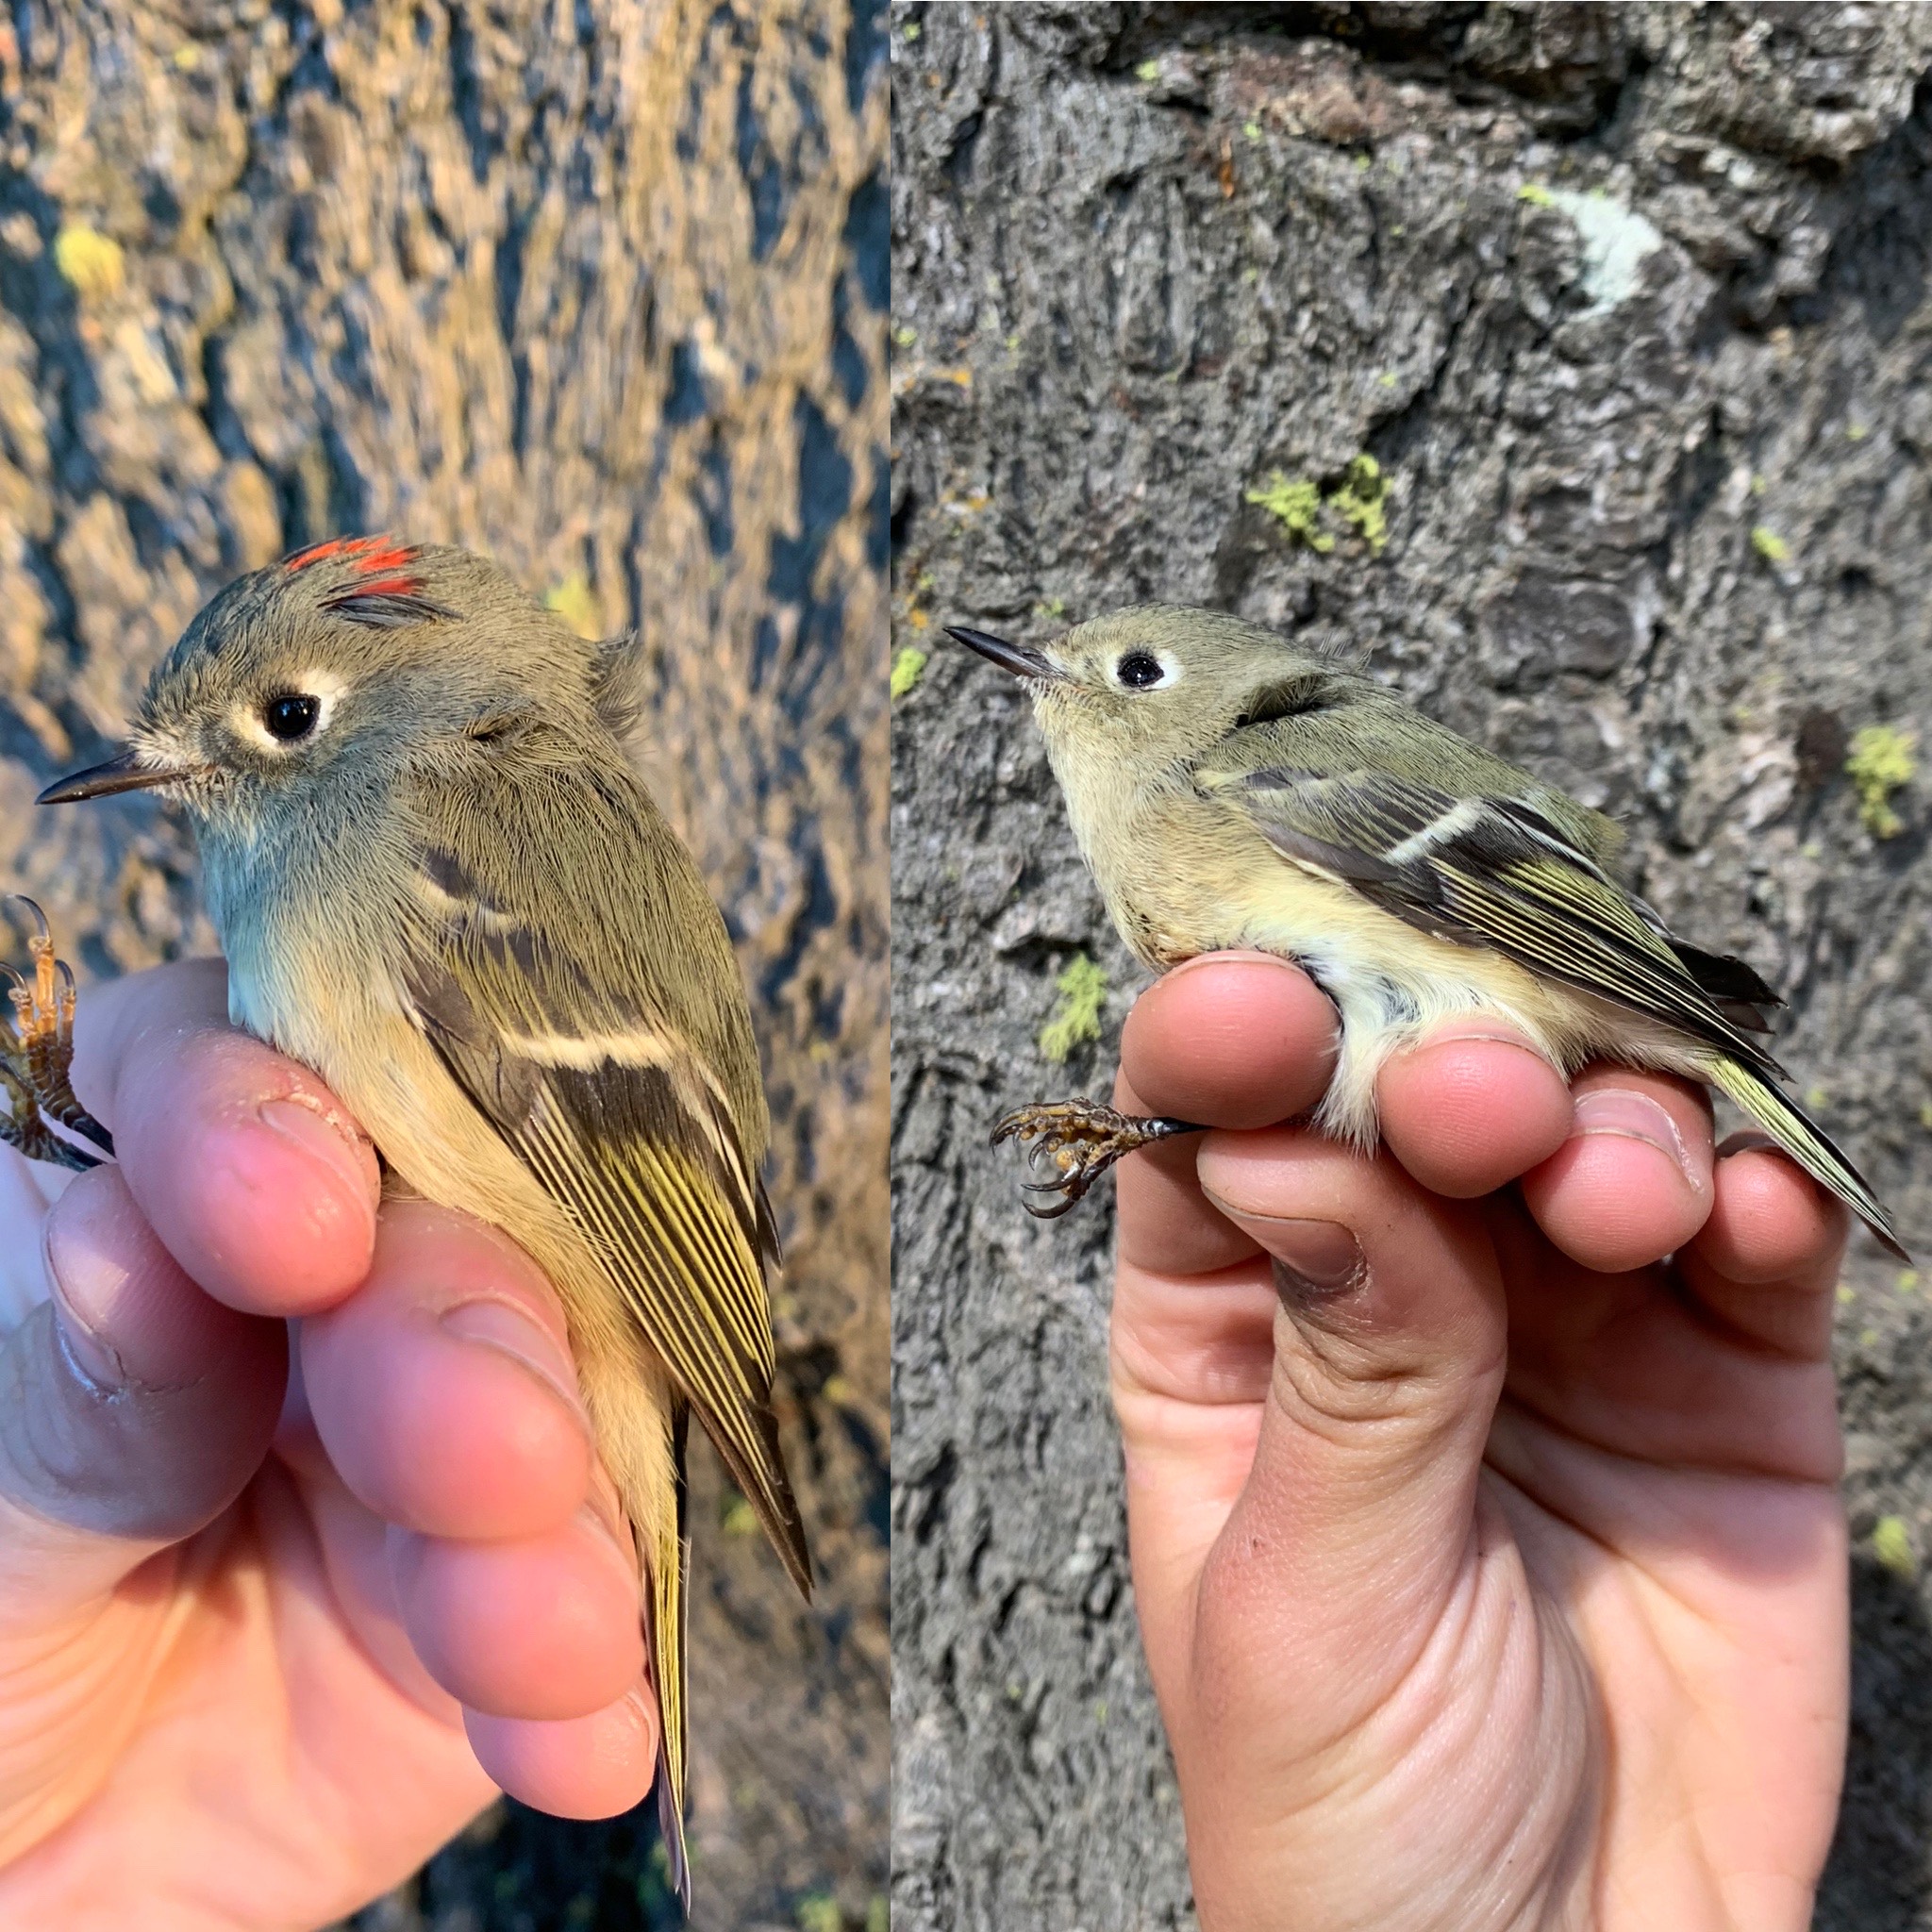 two images show small gray songbirds held by biologists' hands. One bird has a small red spot of feathers on its head